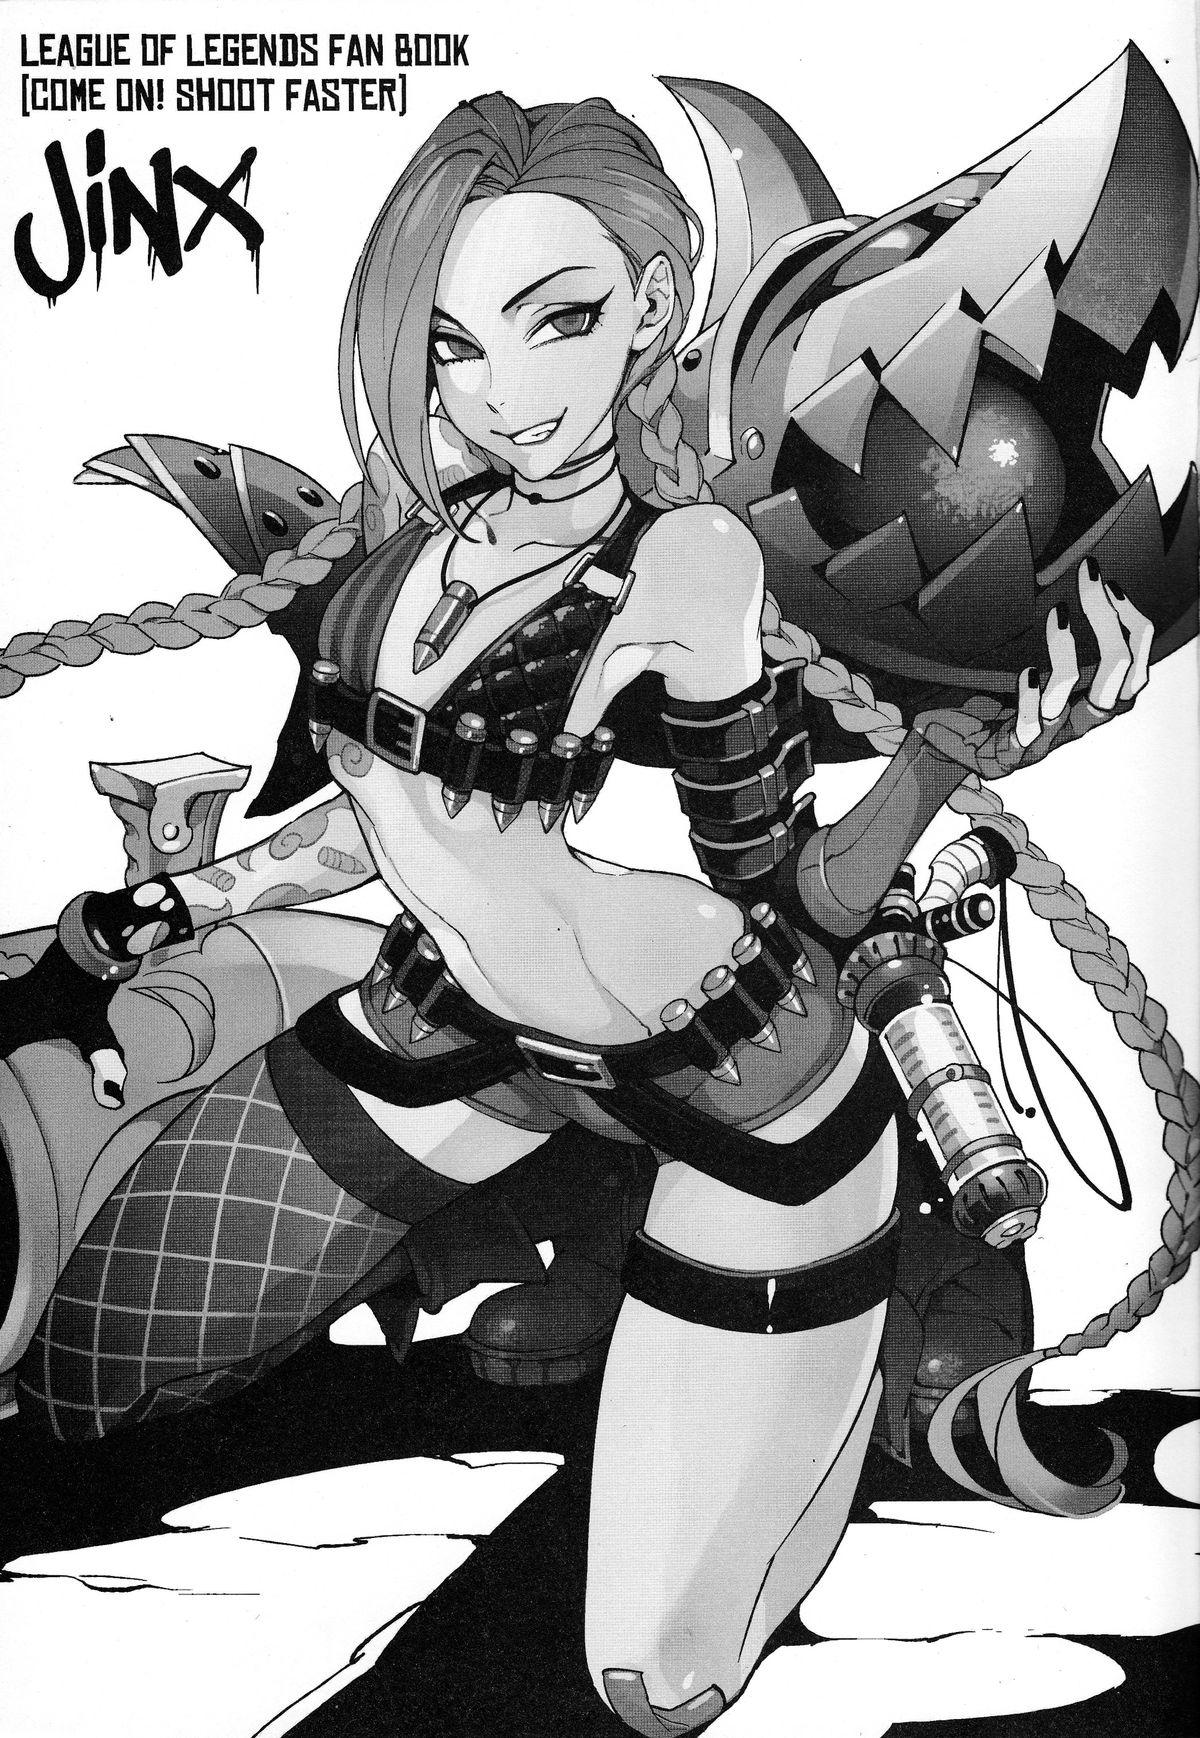 Hottie JINX Come On! Shoot Faster - League of legends Tight Ass - Page 2